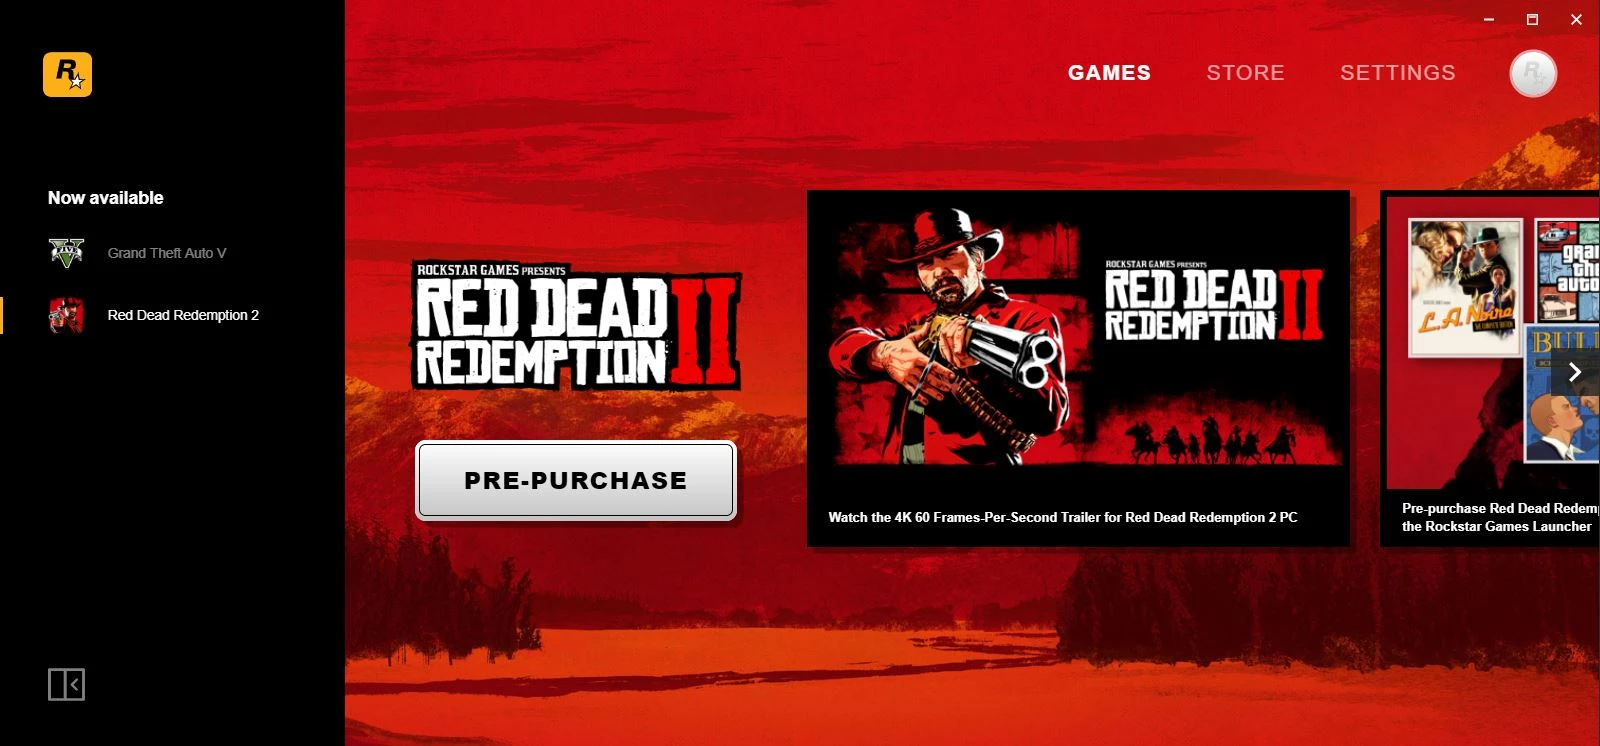 Red Dead Redemption 2 PC requirements, preorder details